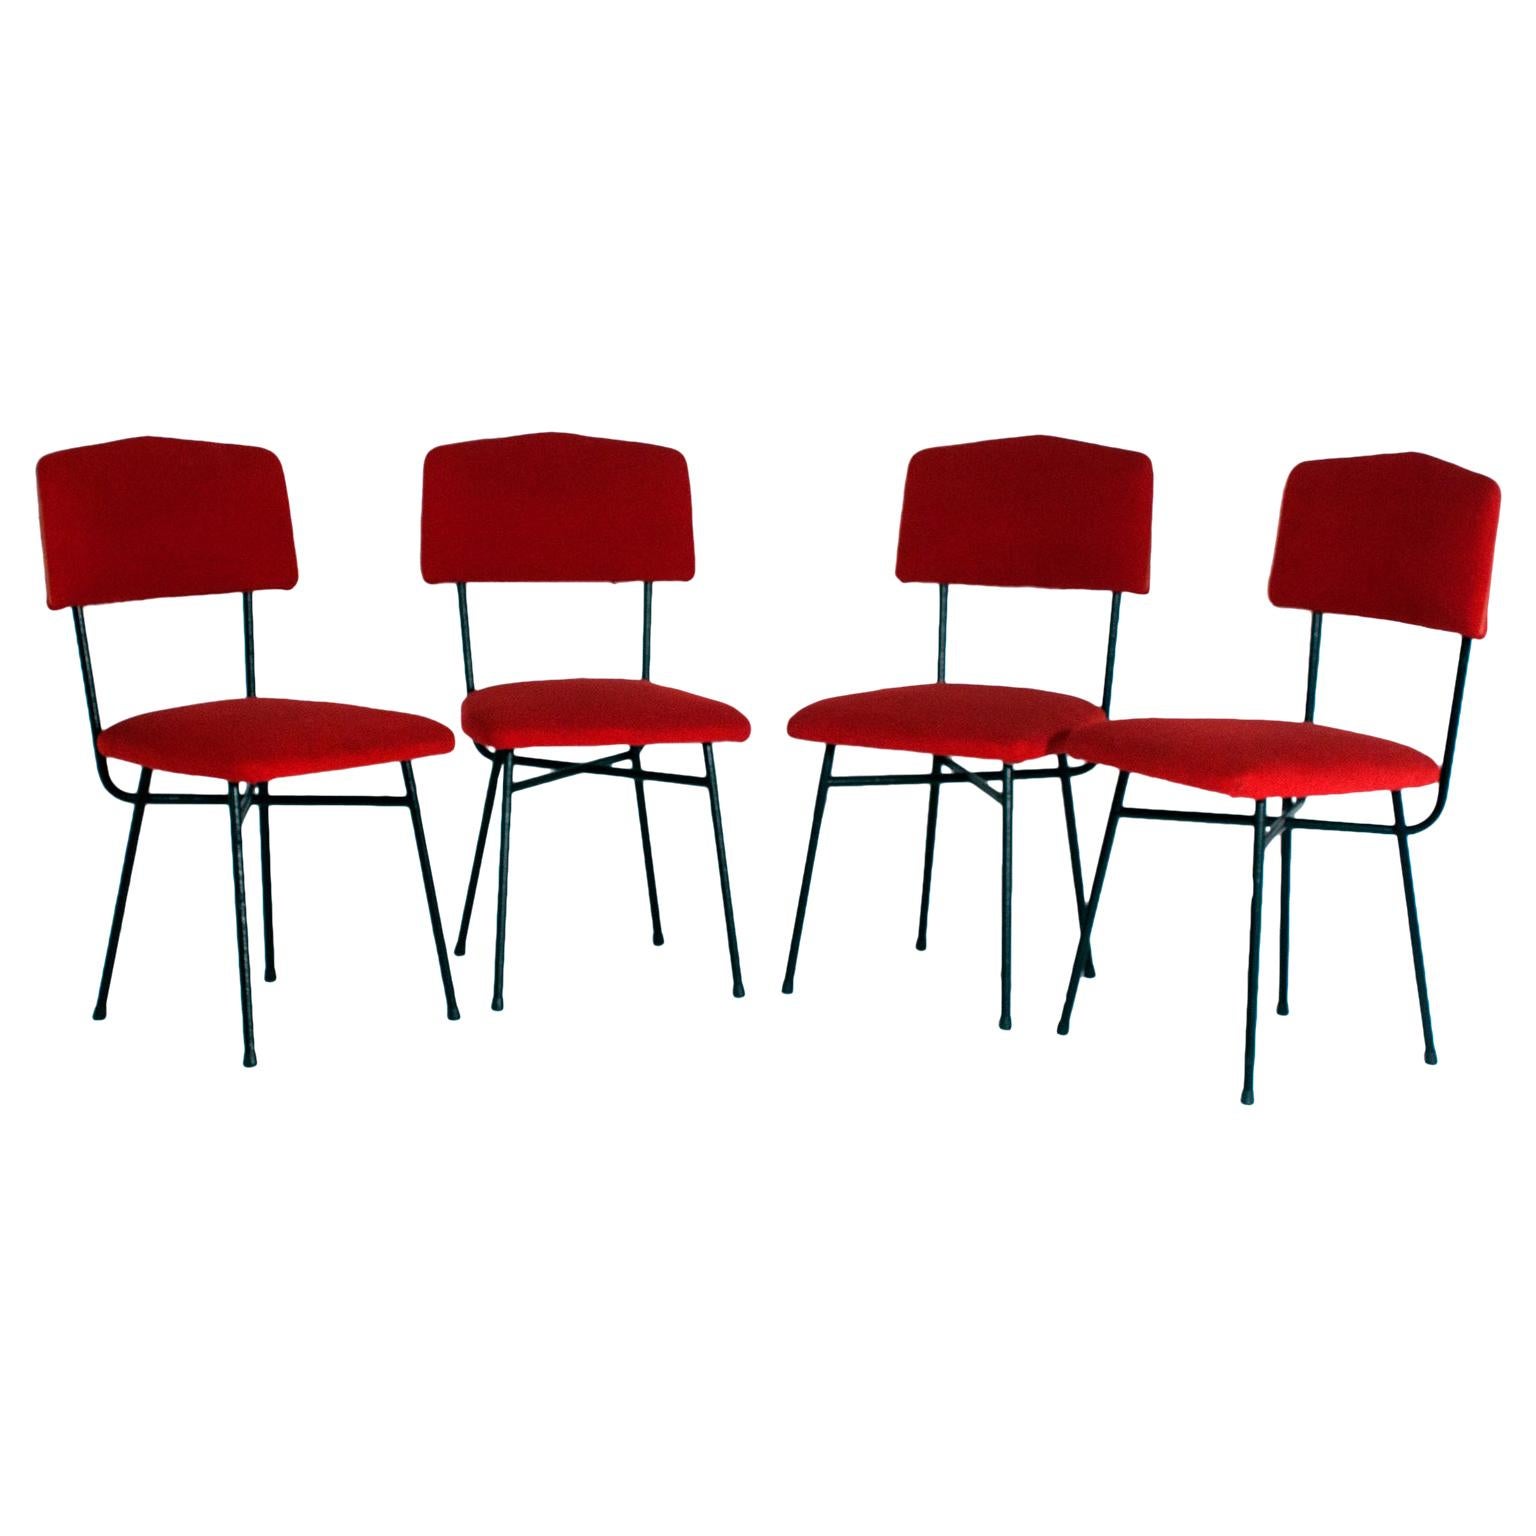 Set of Four Italian Chairs, Italy, 1950s, Iron and Red Fabric